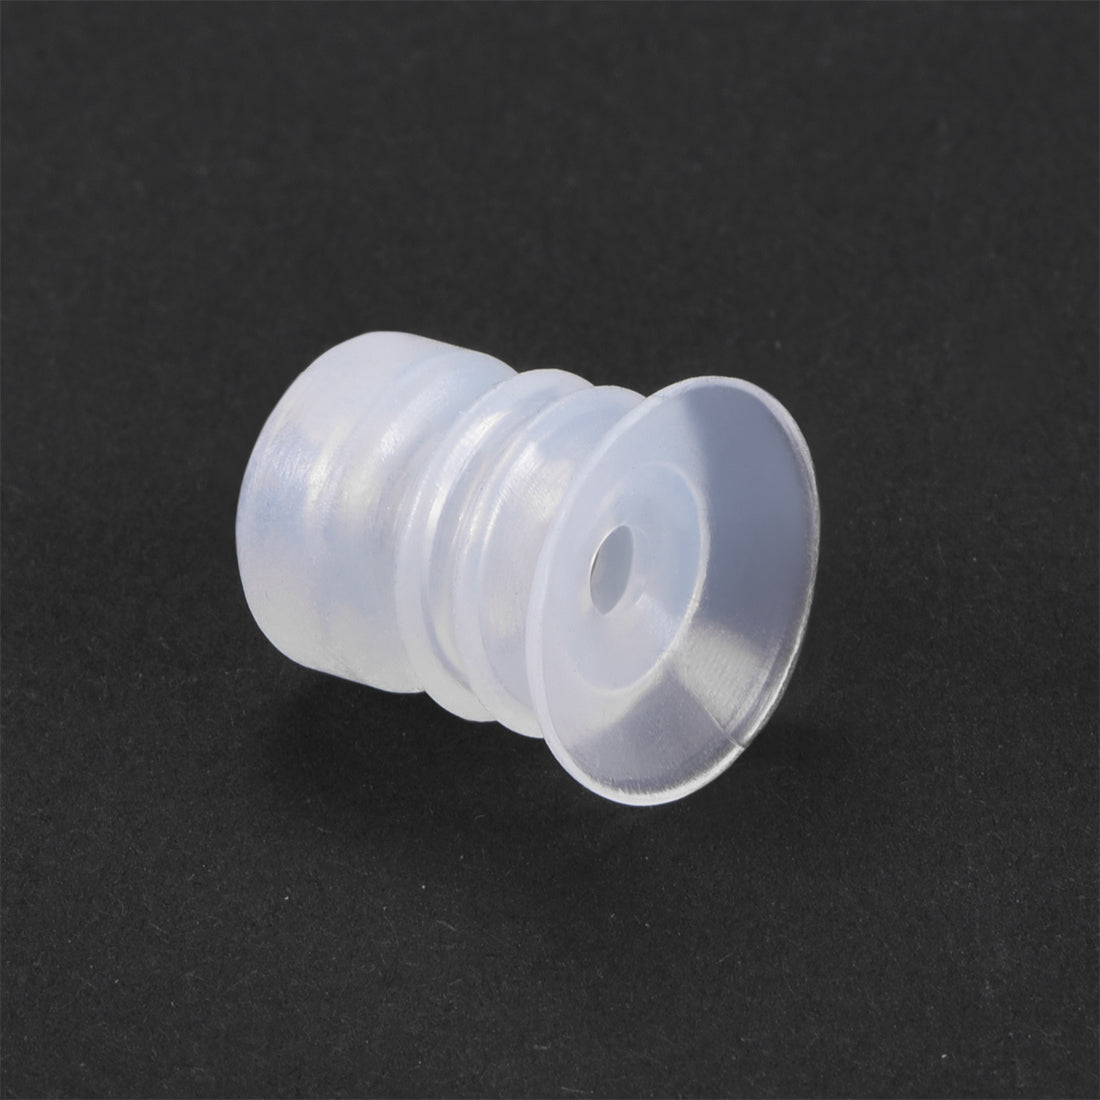 uxcell Uxcell Clear White Soft Silicone Waterproof Vacuum Suction Cup 15mmx5mm Bellows Suction Cup,4pcs